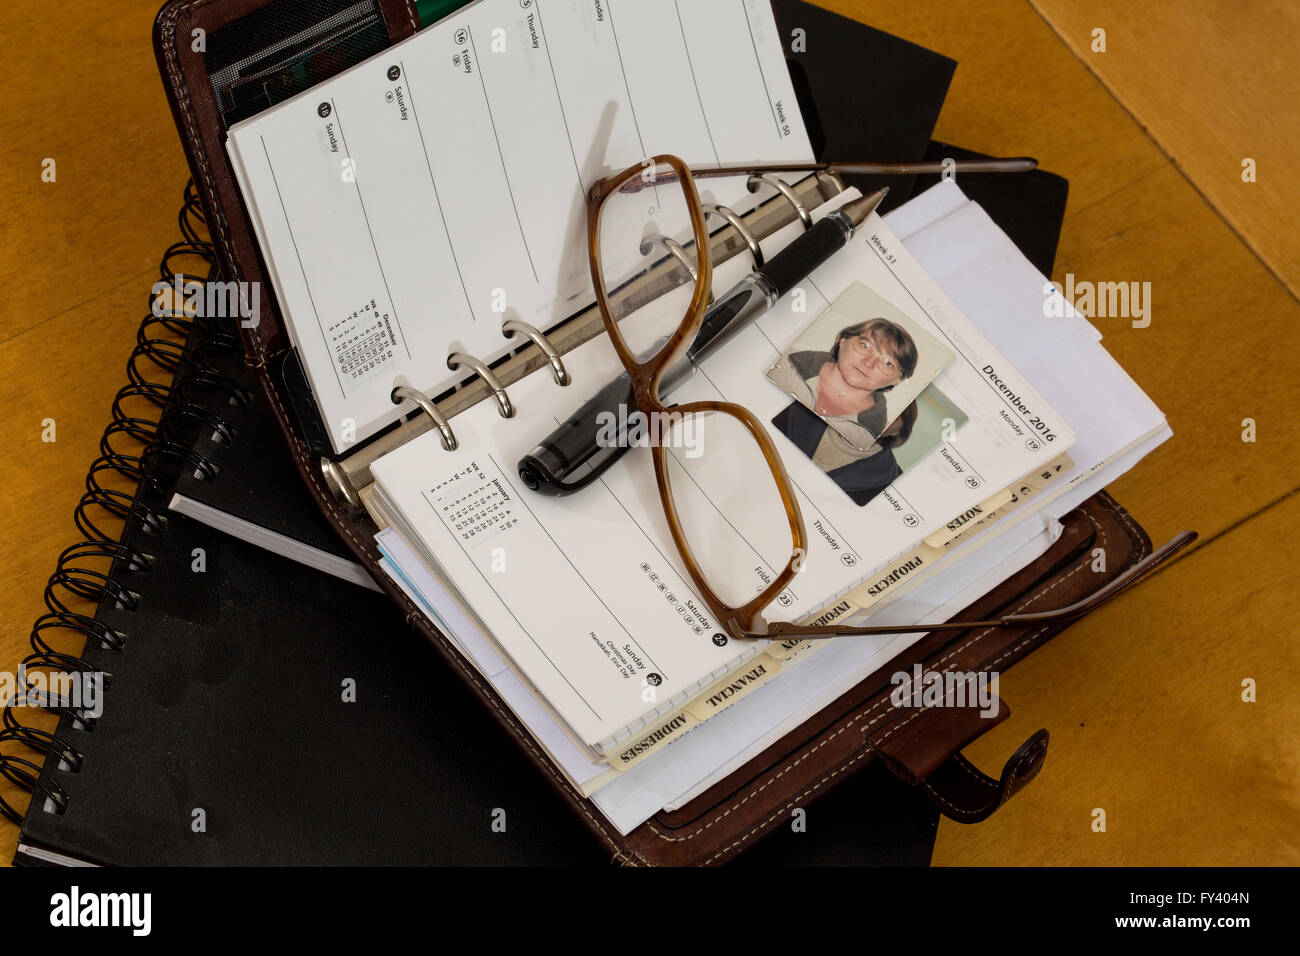 Plans for the Future. A diary open to December 25, glasses and a passport photo make a still life that is about planning ahead. Stock Photo